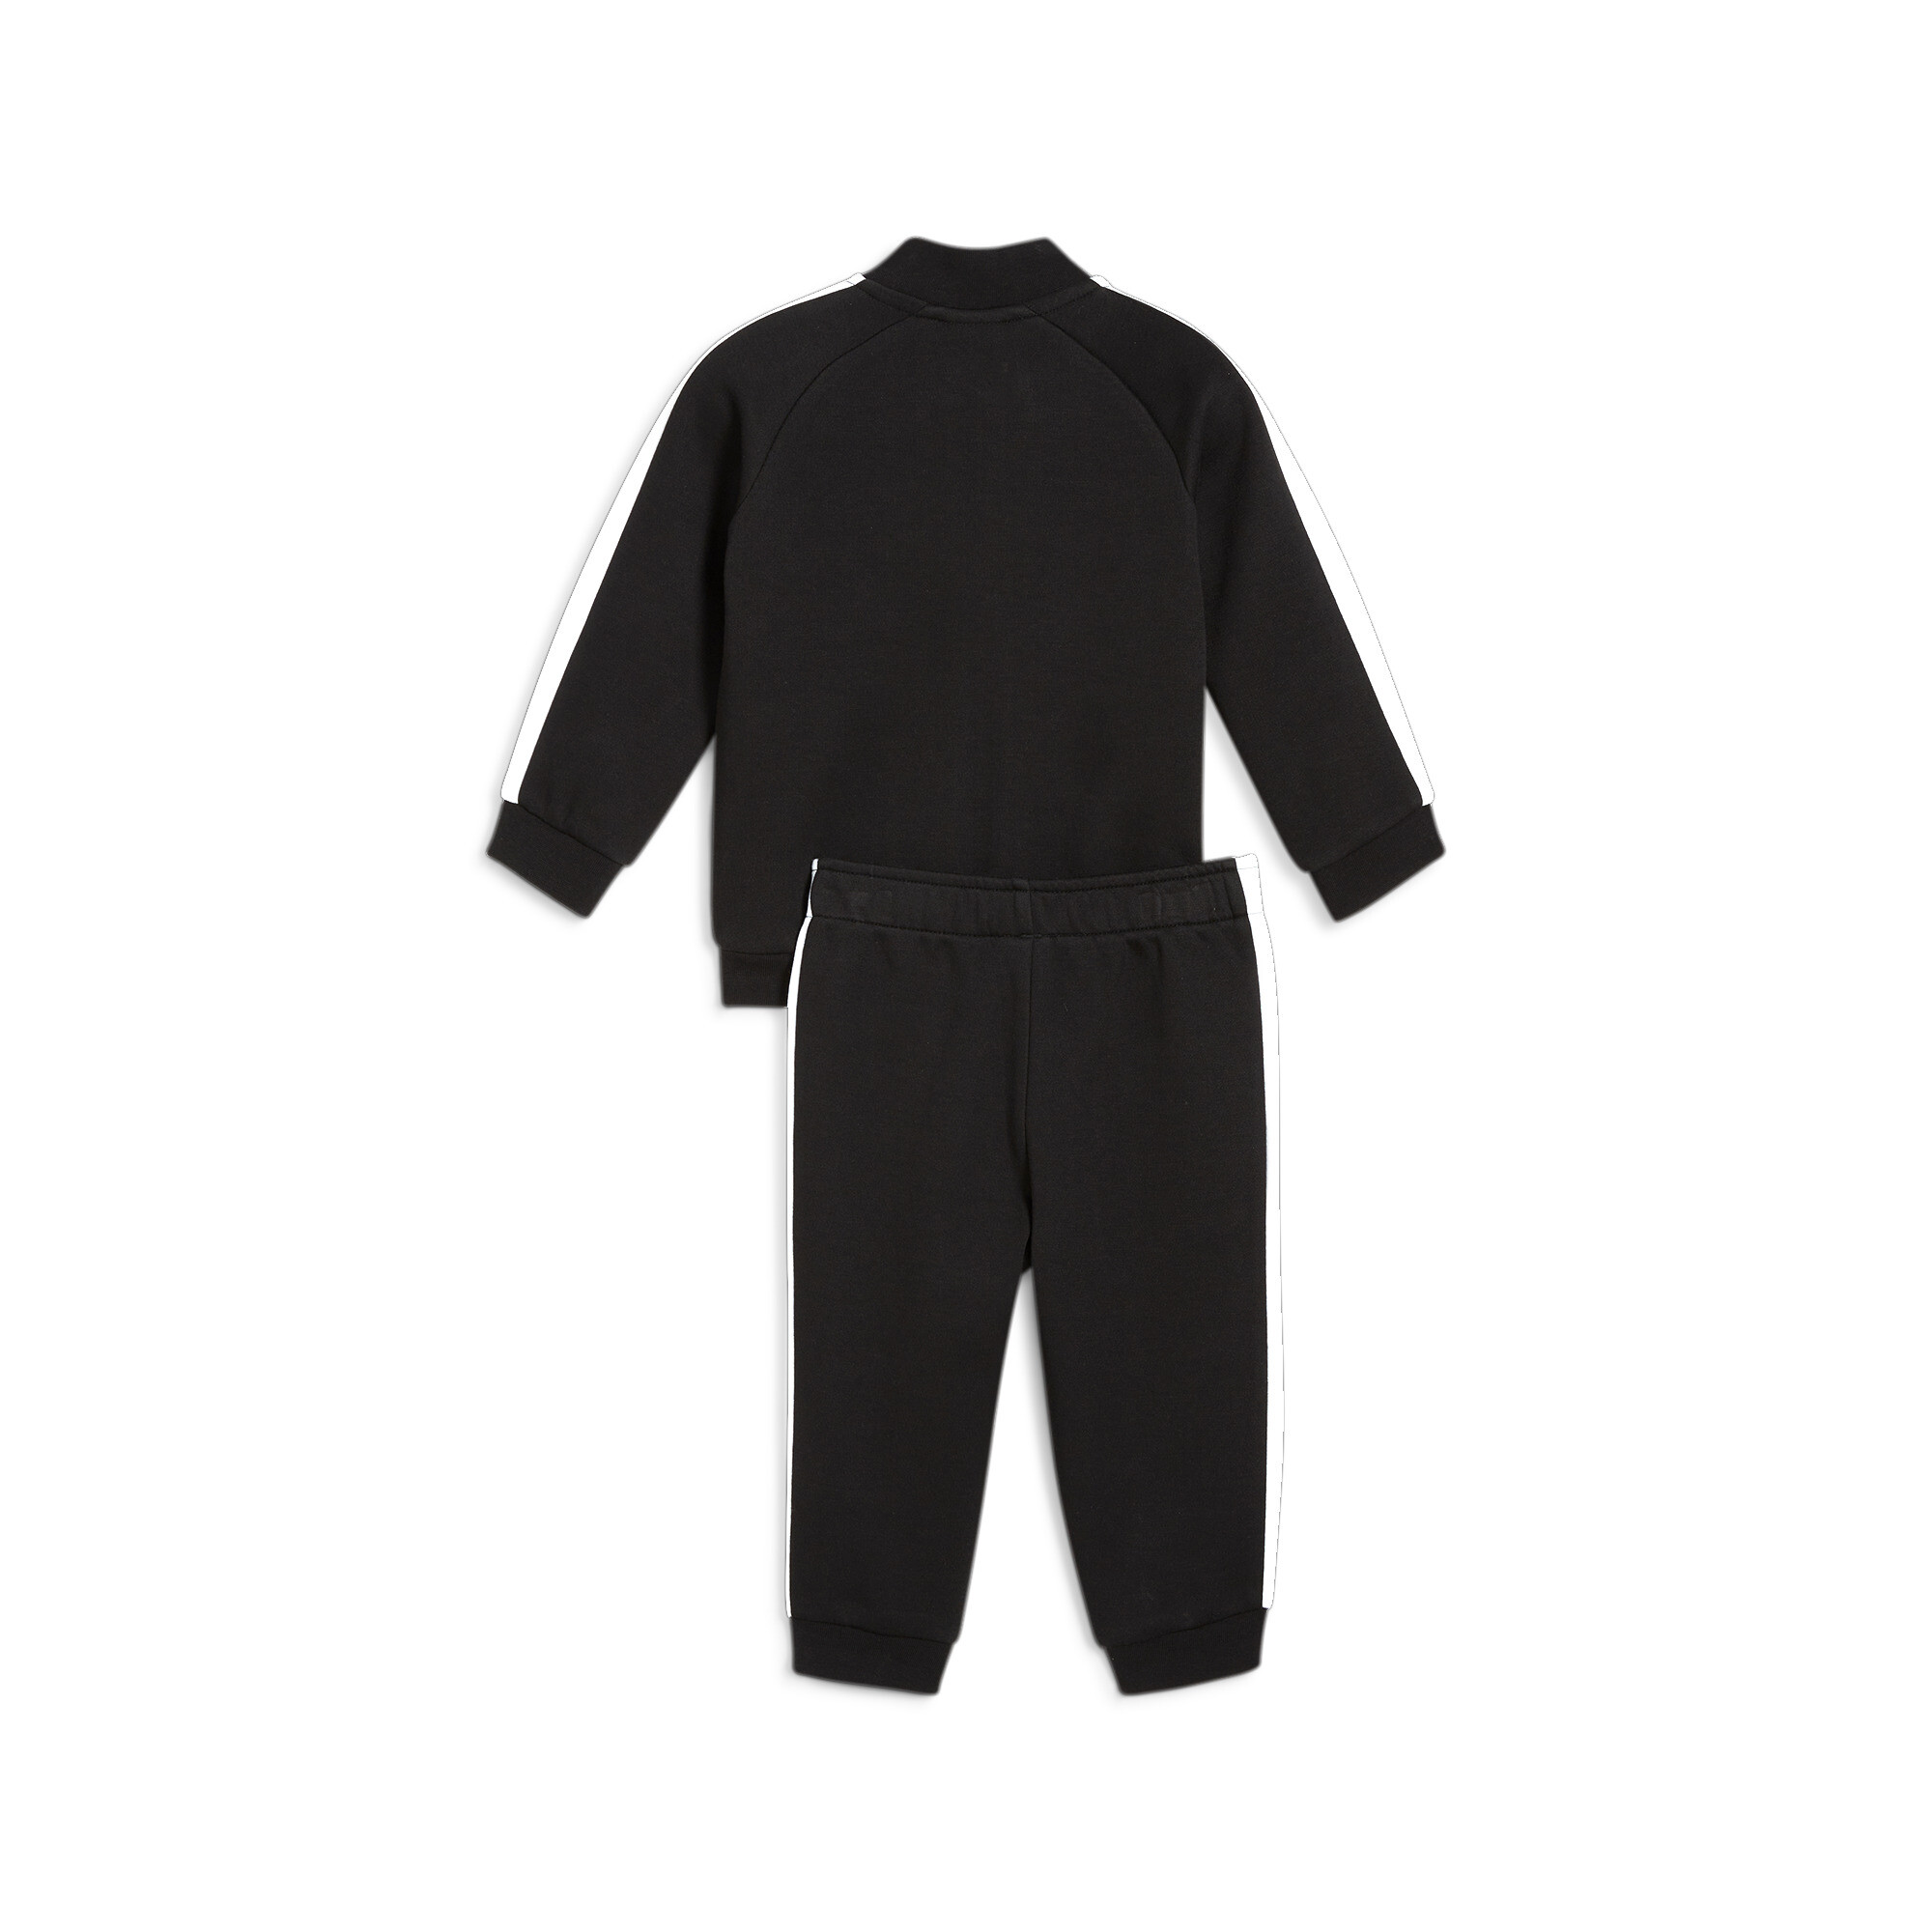 PUMA MINICATS T7 ICONIC Baby Tracksuit Set In 10 - Black, Size 3-4 Youth